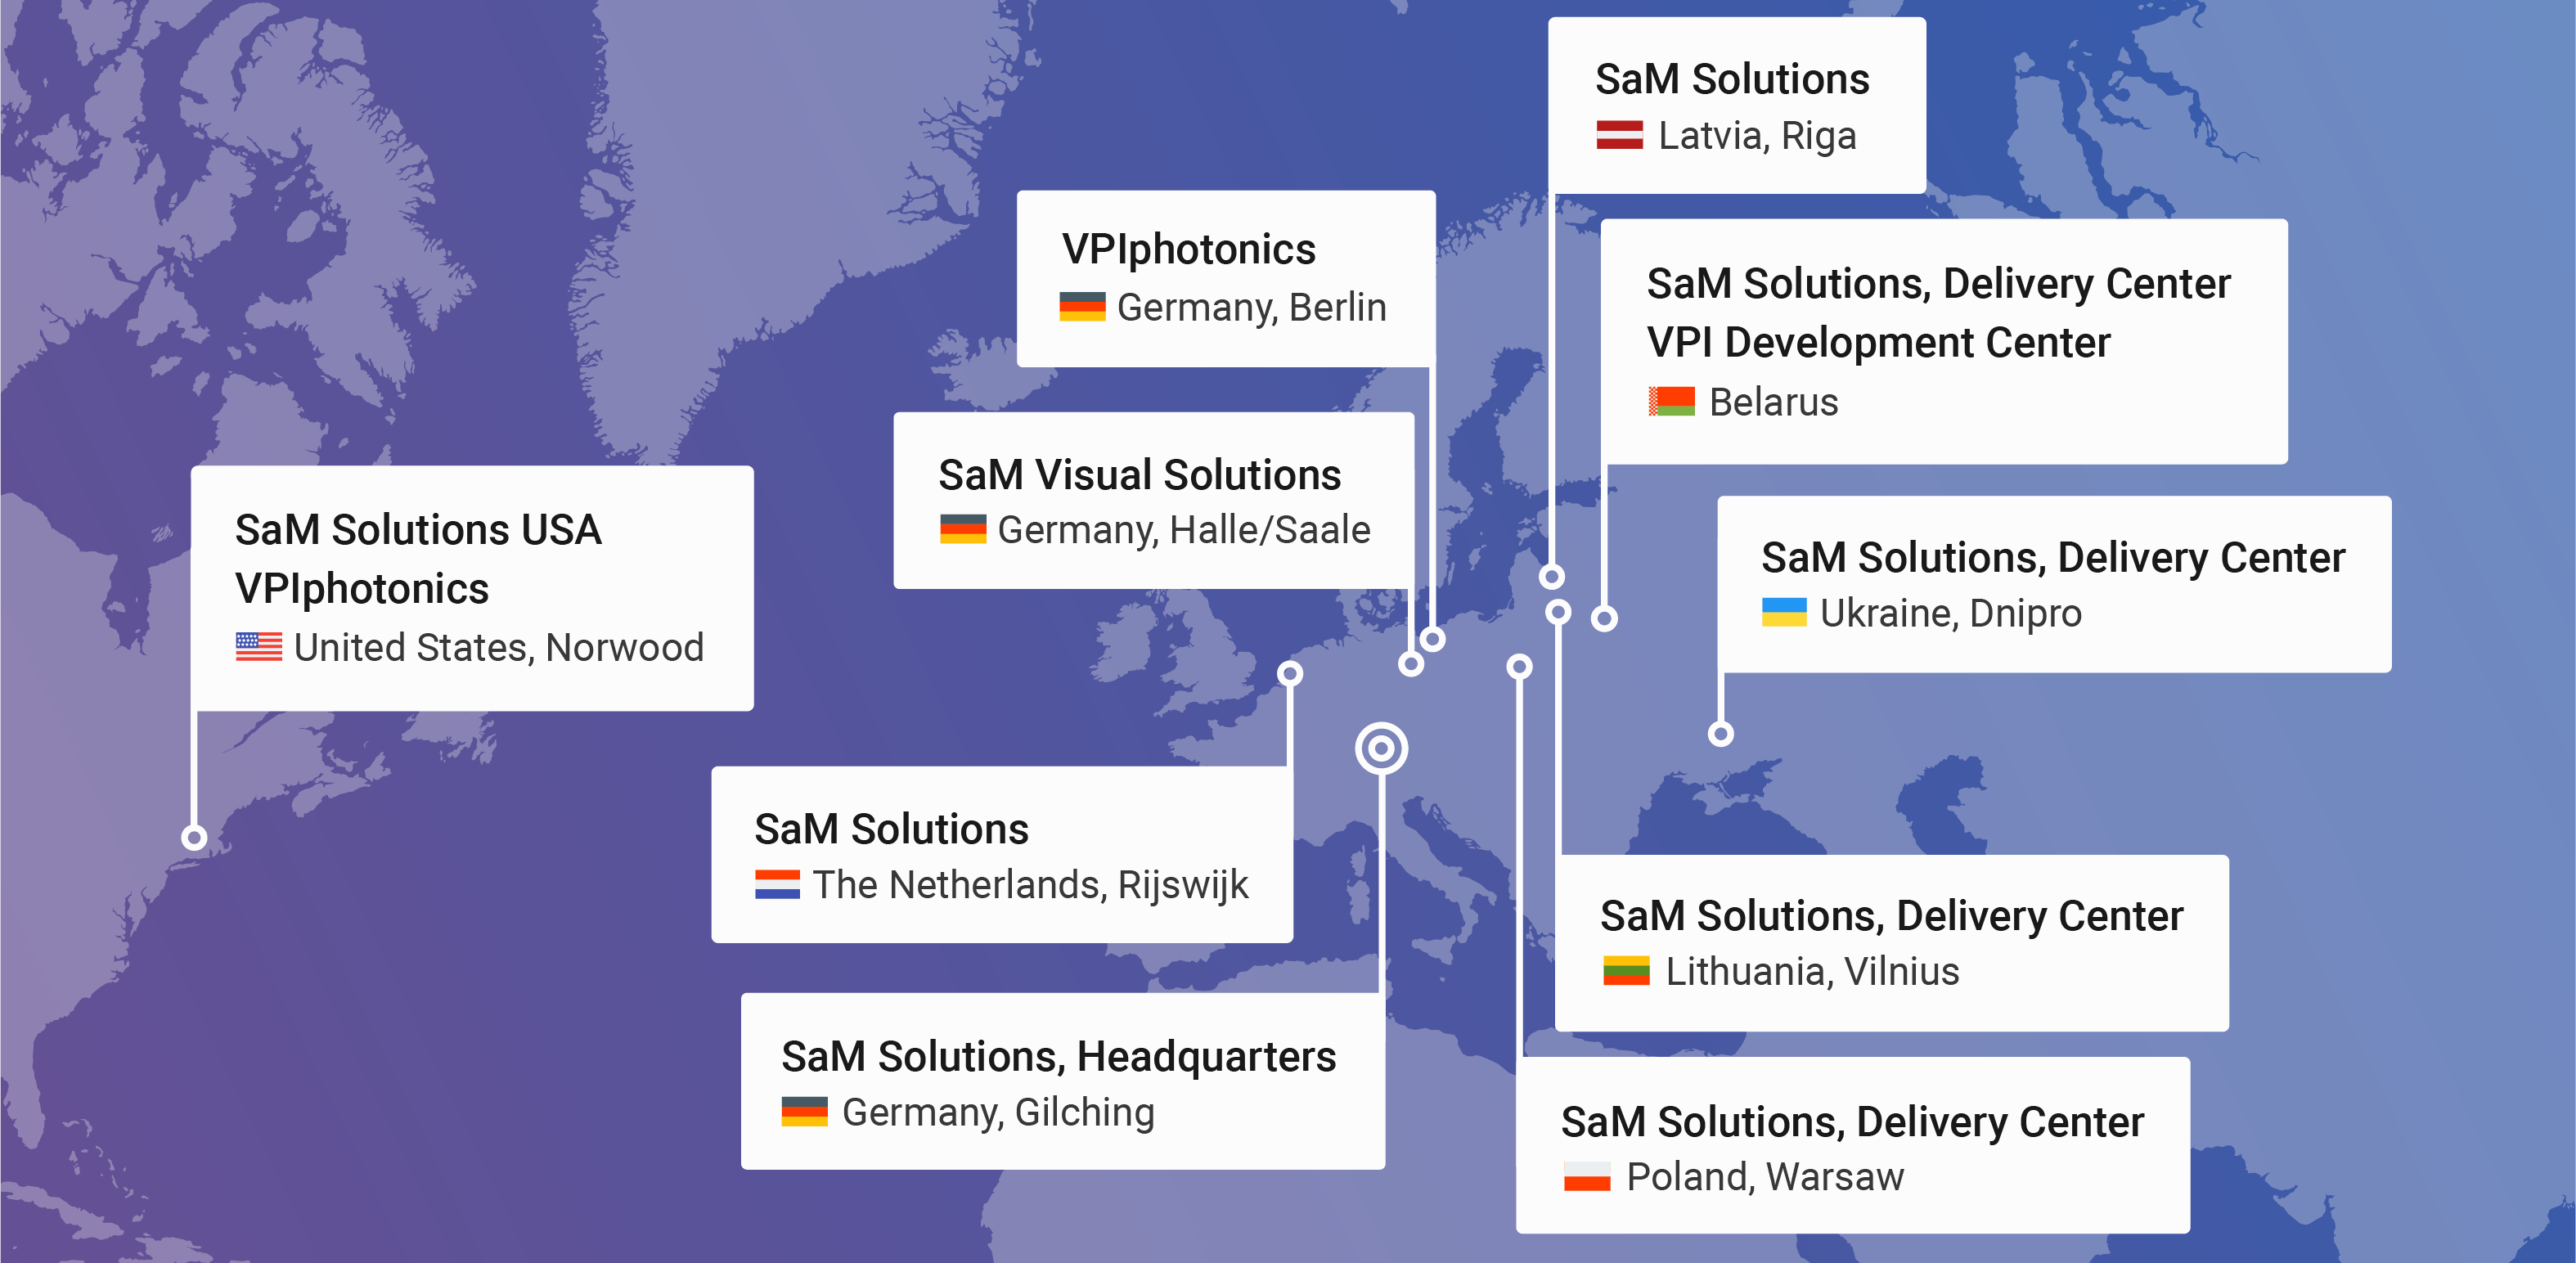 SaM Solutions Structure